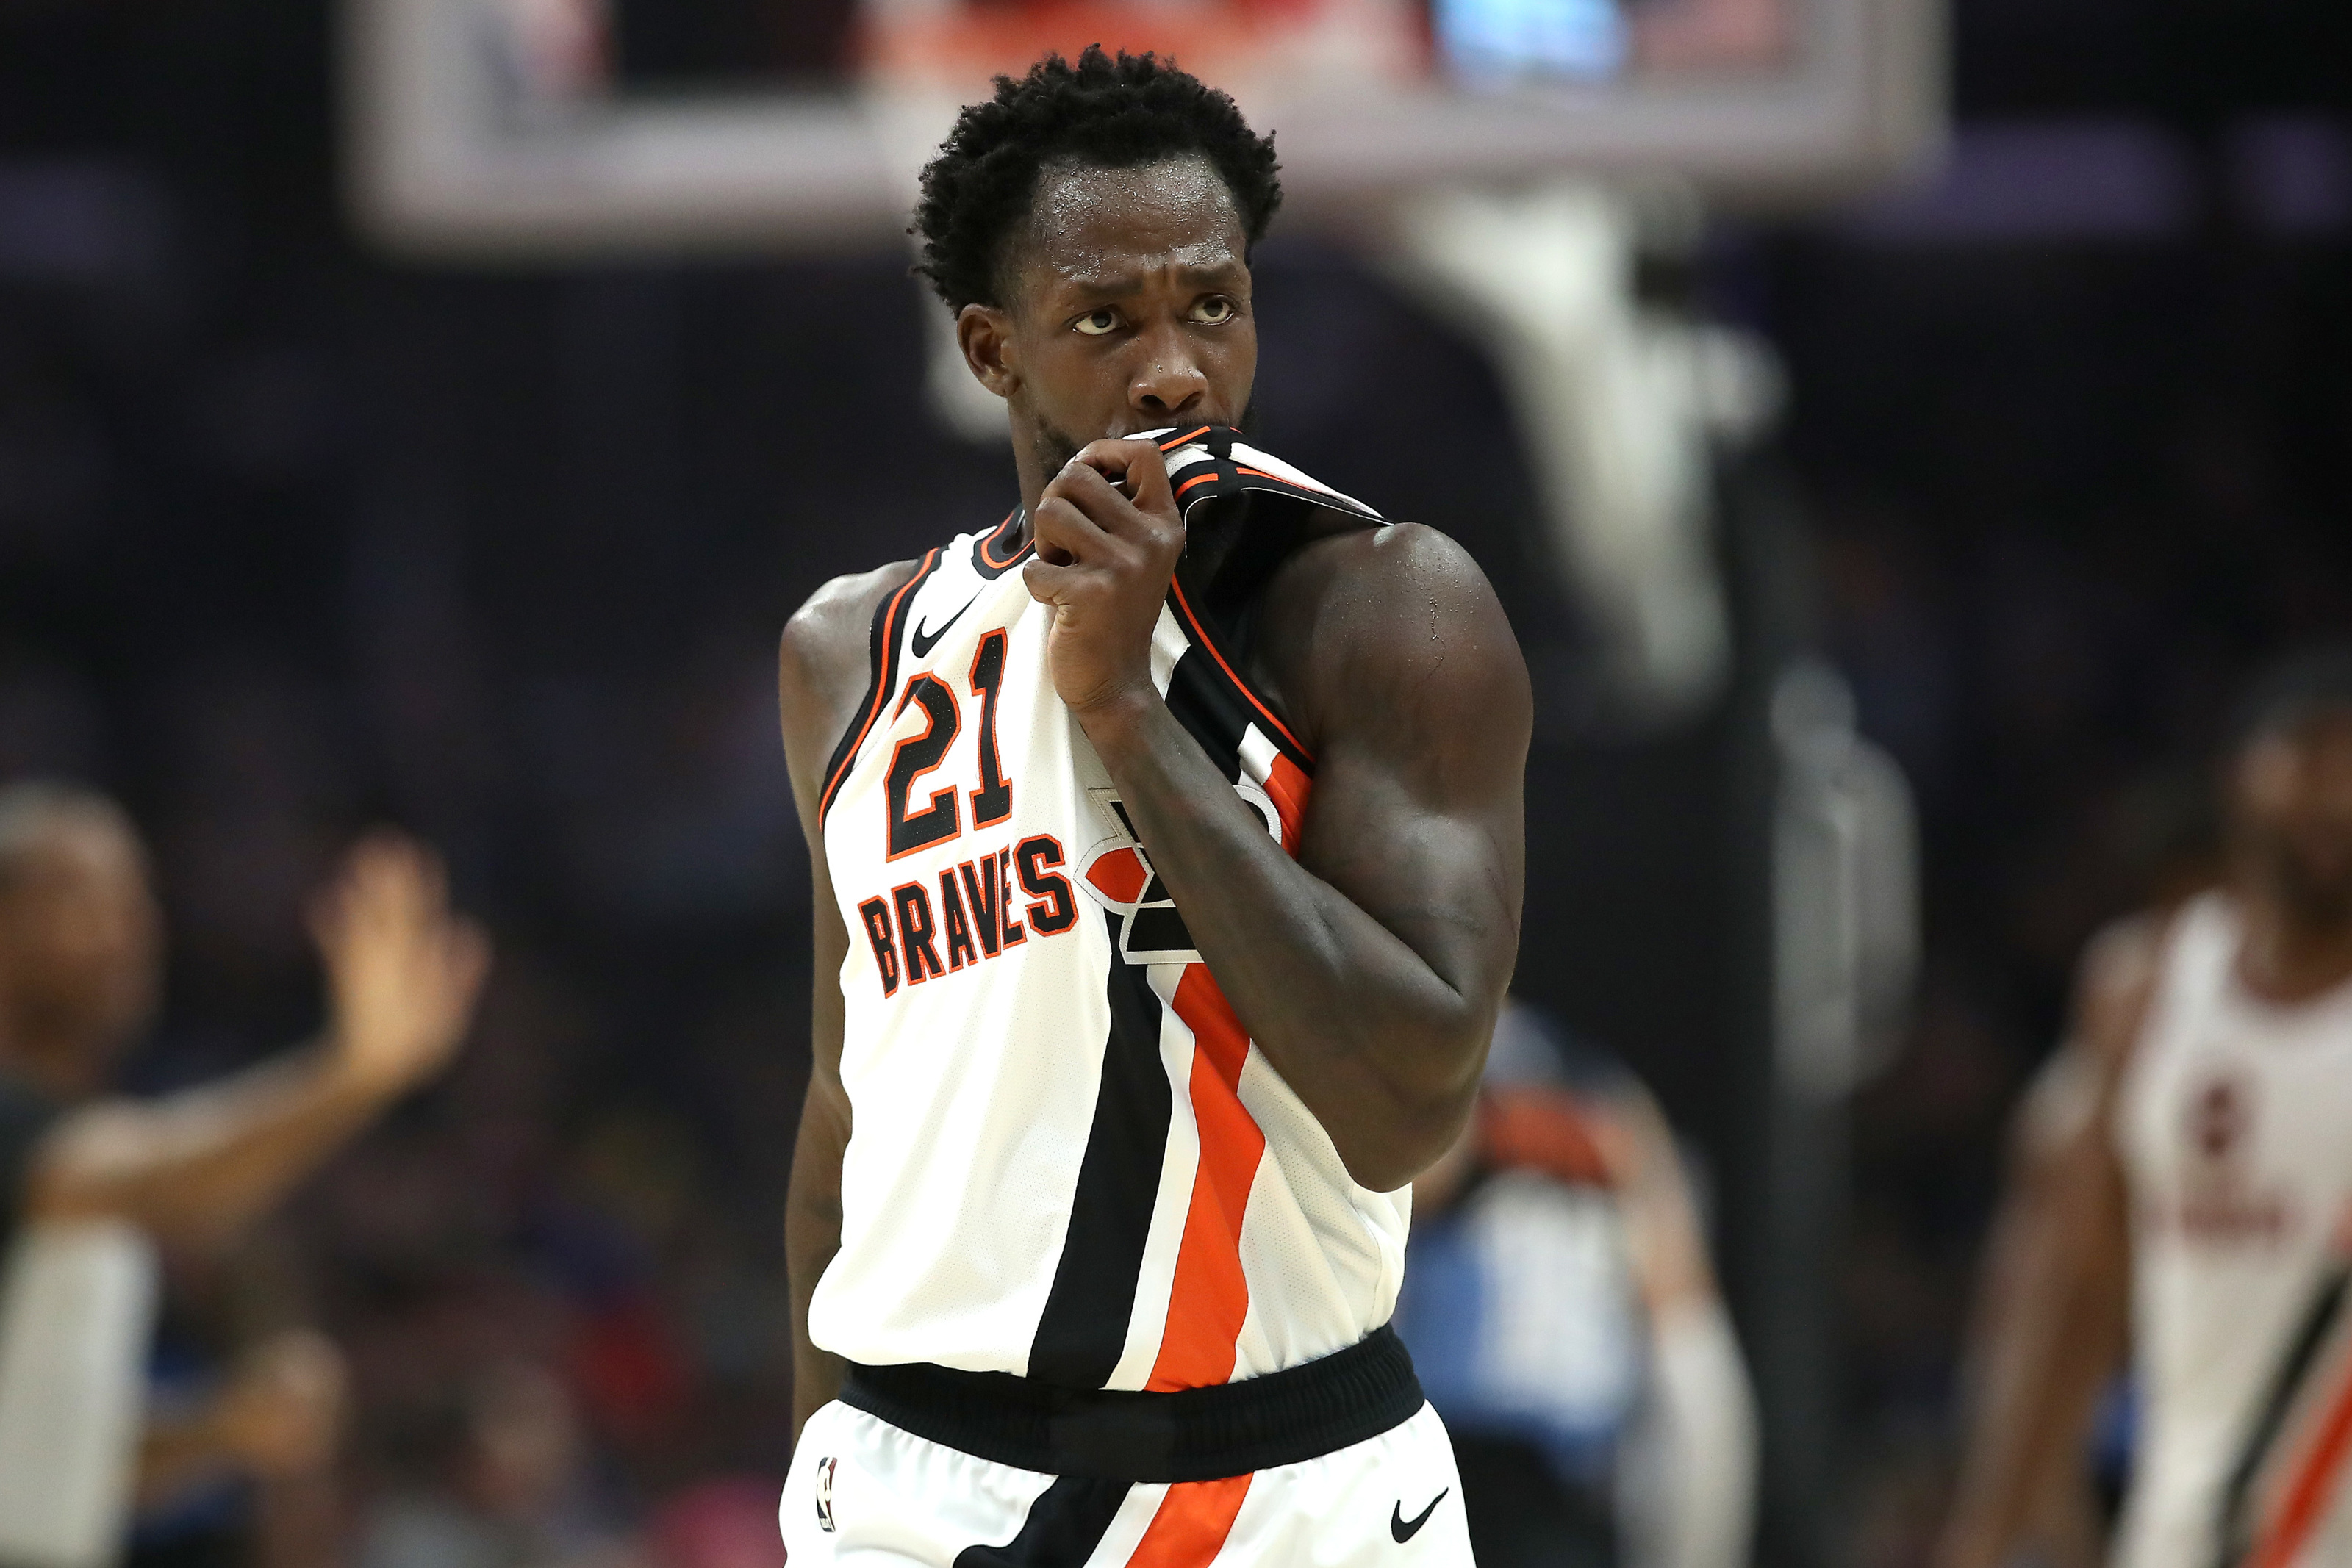 LA Clippers: Patrick Beverley Ready for Bledsoe & Pelicans